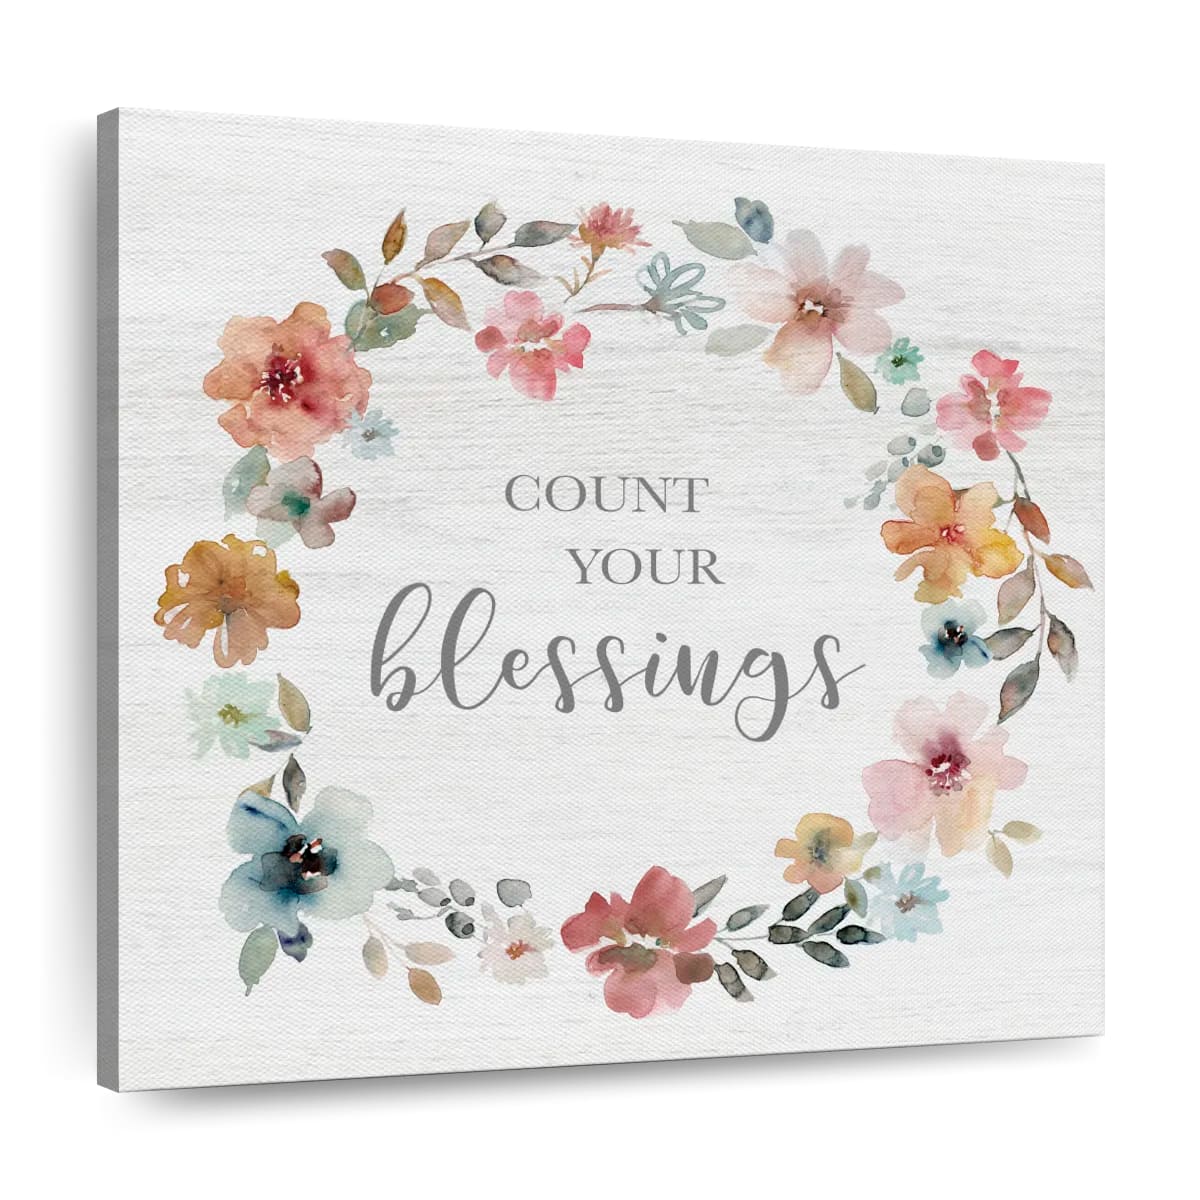 Count Your Blessings Square Canvas Wall Art - Bible Verse Wall Art Canvas - Religious Wall Hanging